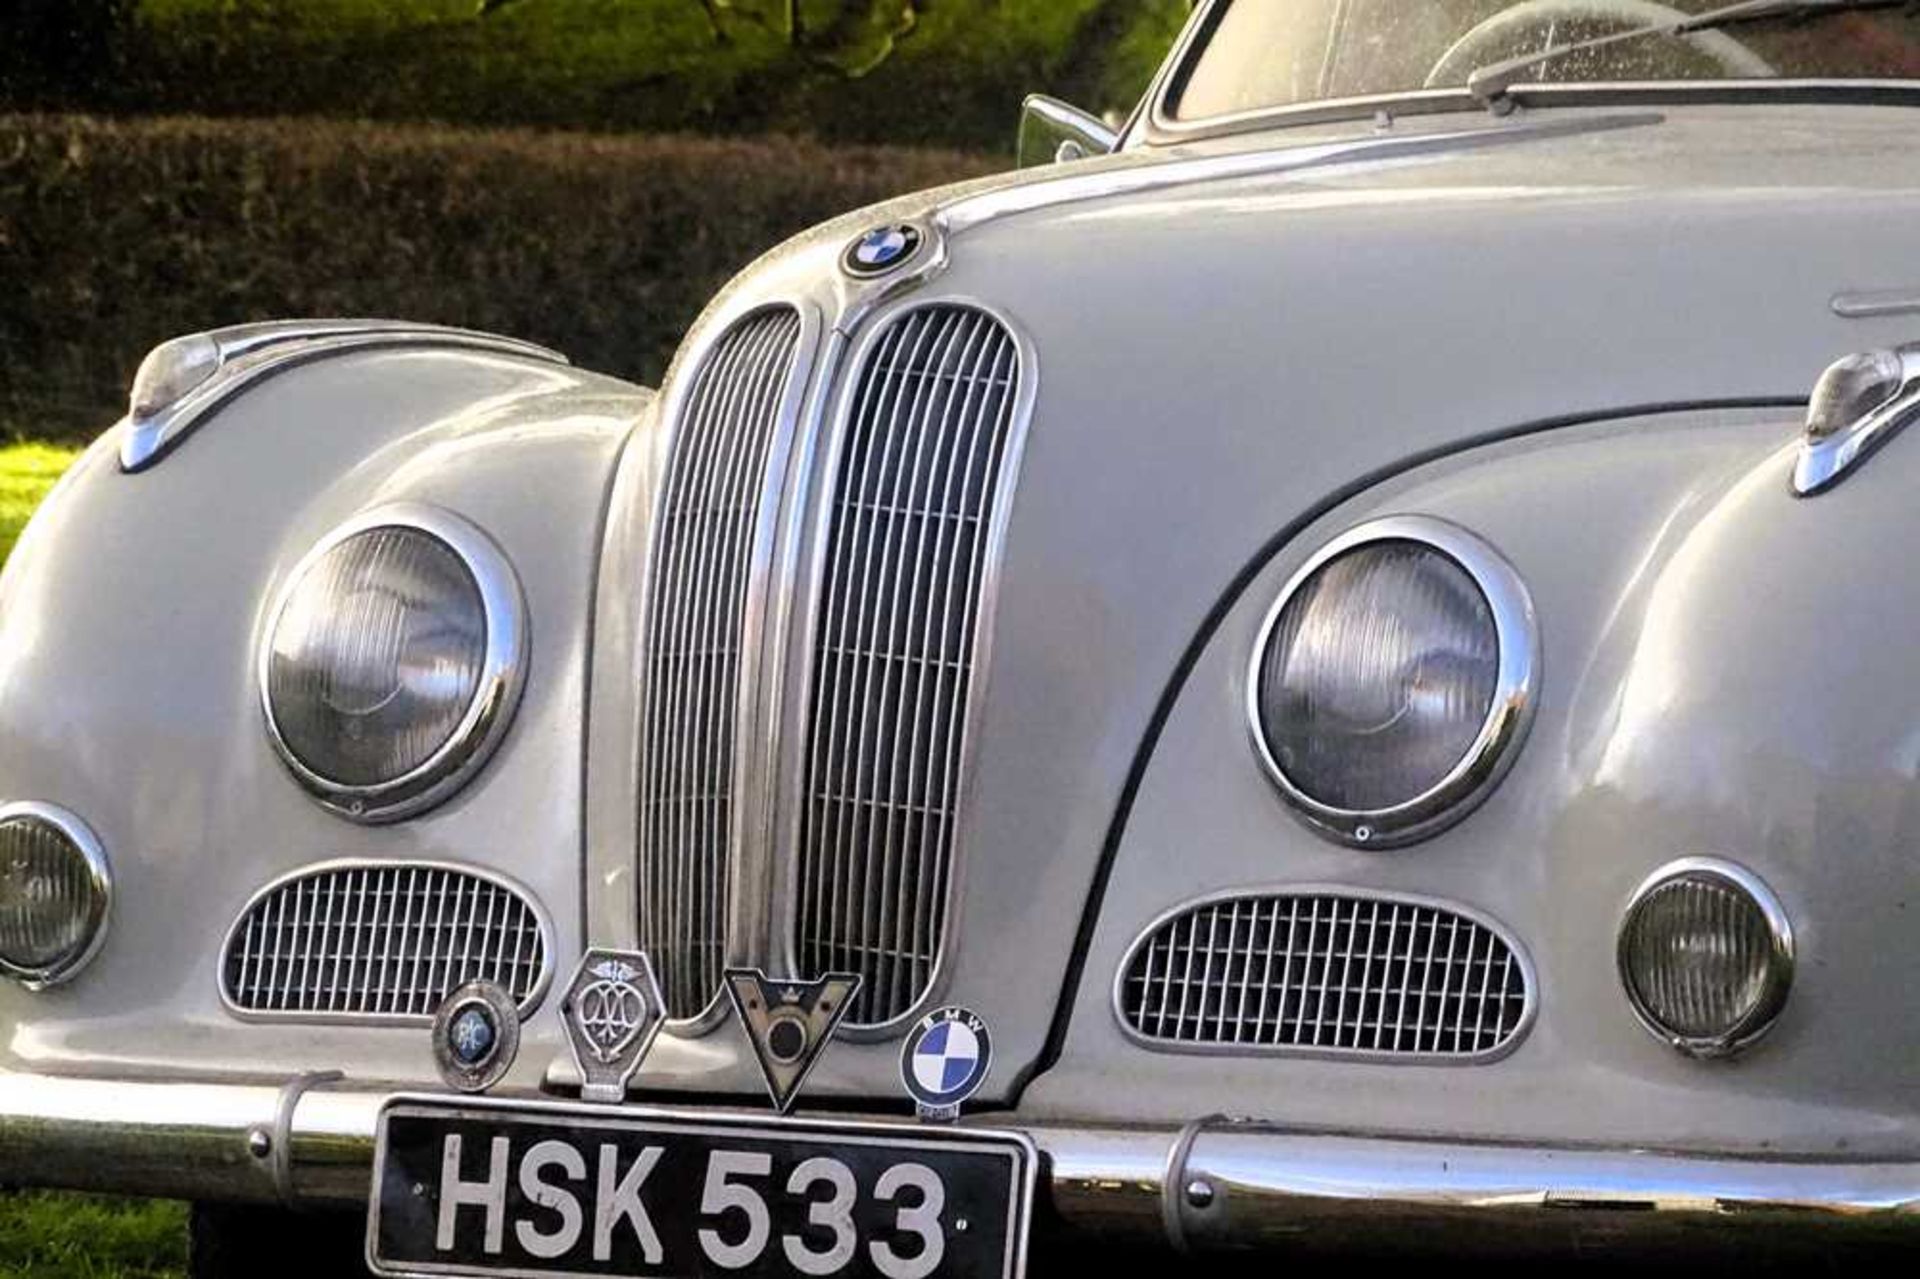 1957 BMW 502 Believed to be 1 of only 12 supplied new to the UK market - Image 23 of 64